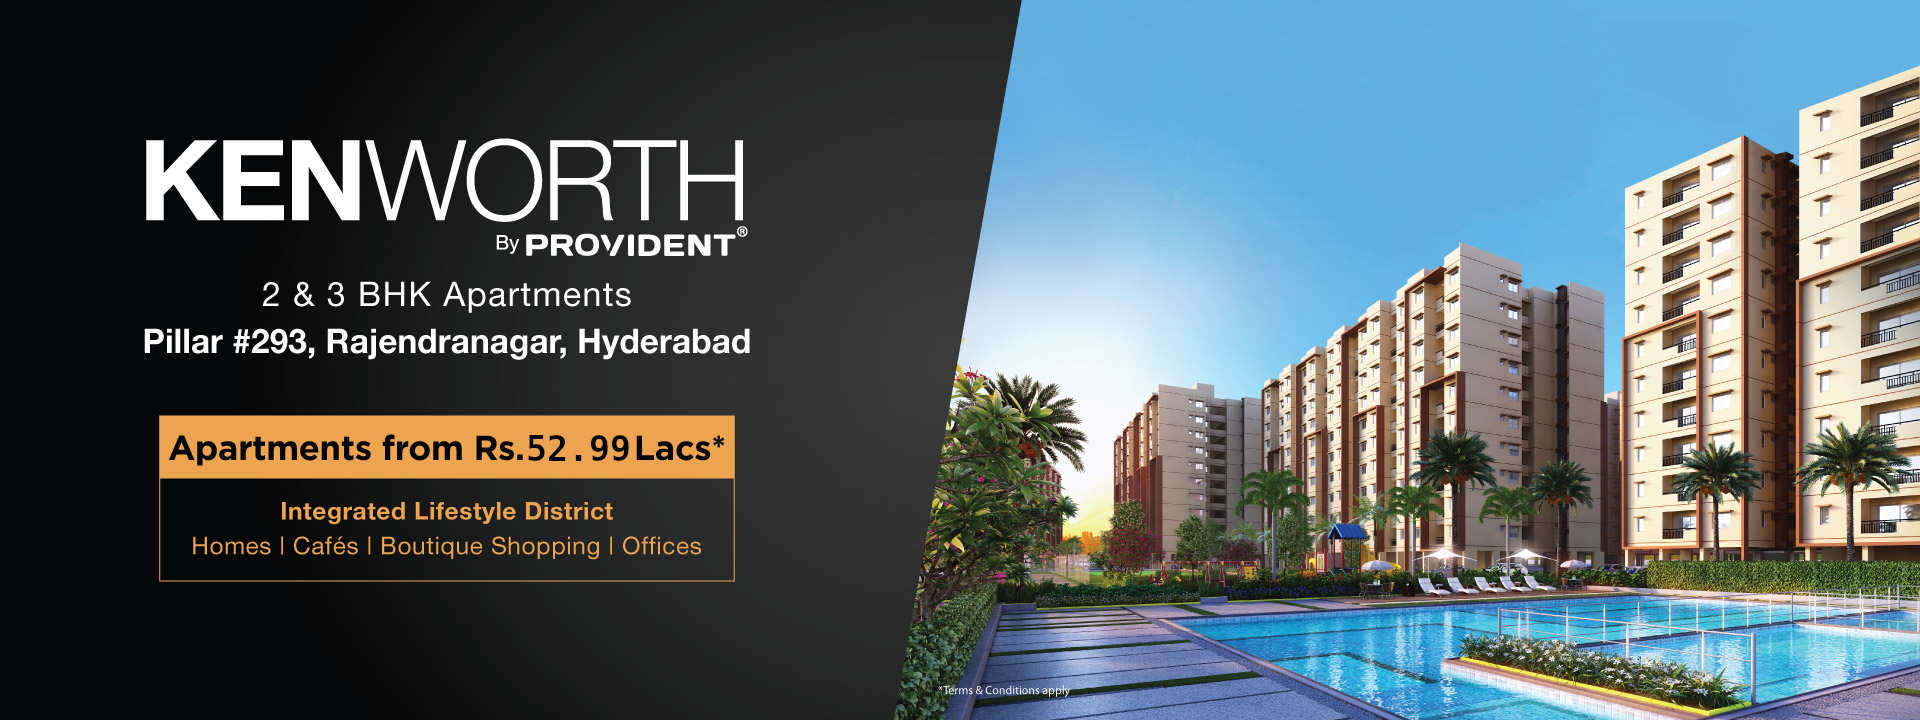 Provident Kenworth presents 2 & 3 bhk apartments at Rs. 52.99 lakhs in Hyderabad Update